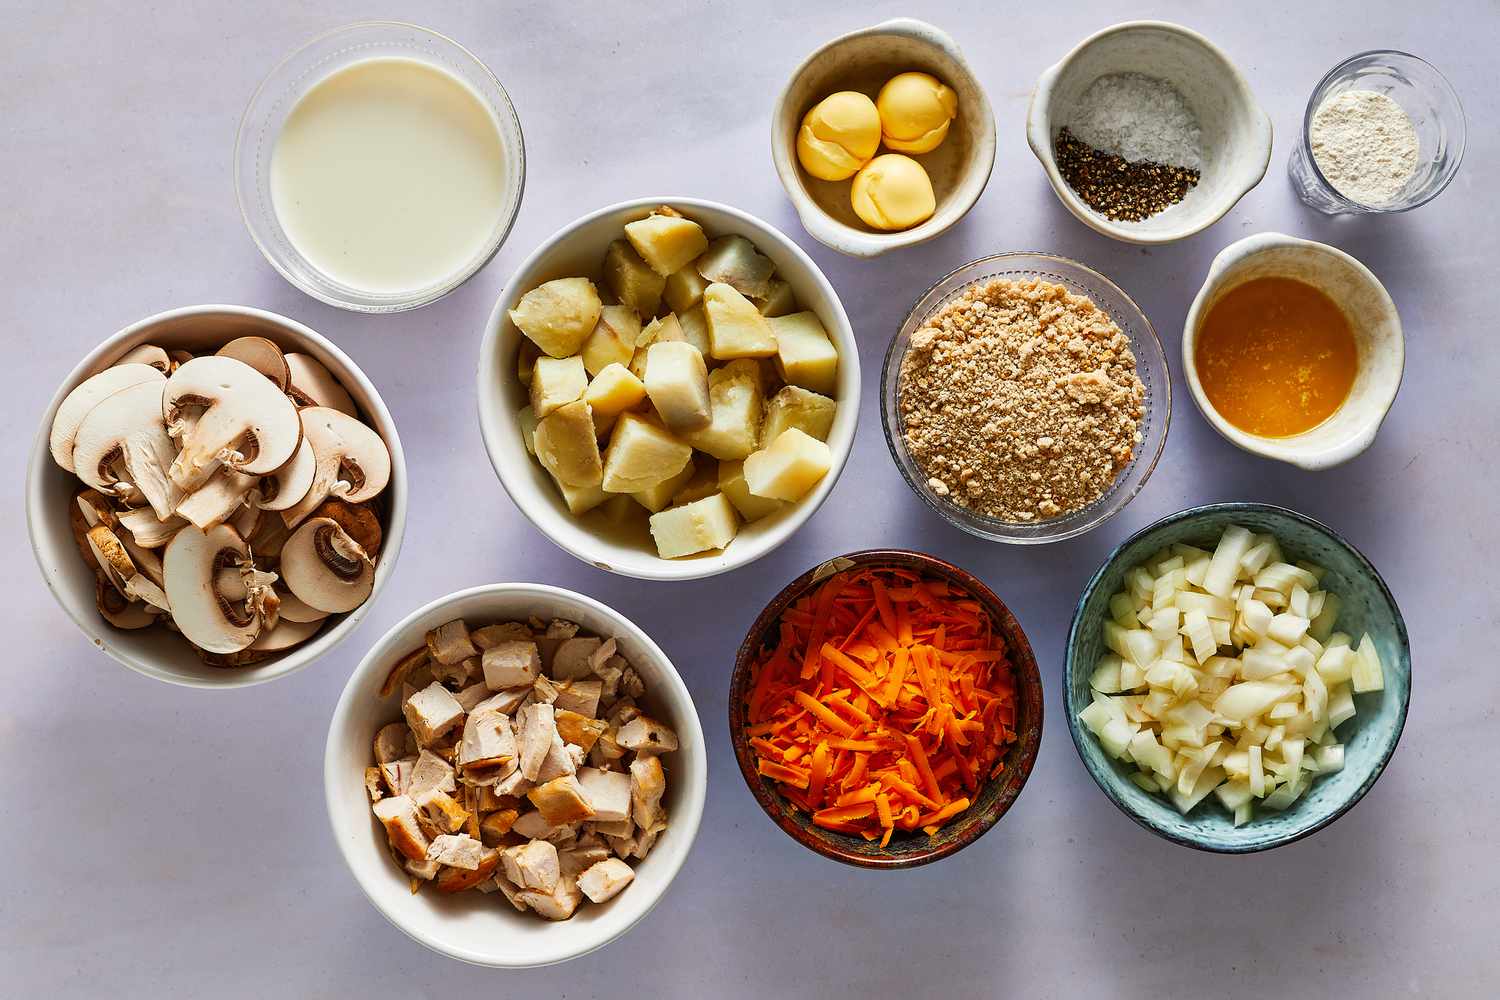 Ingredients to make a chicken and potato casserole